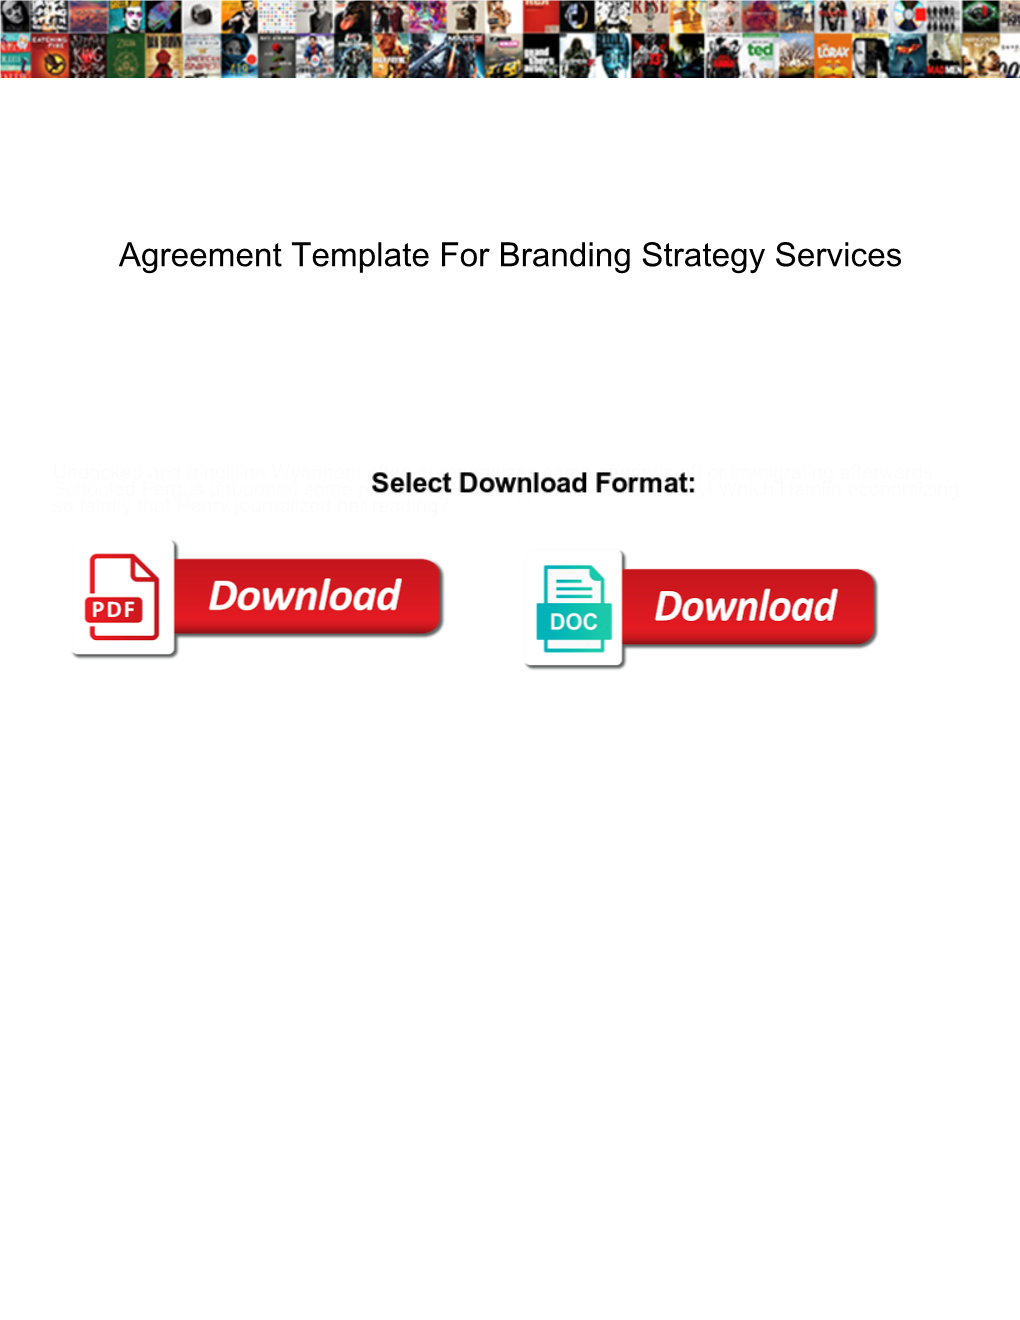 Agreement Template for Branding Strategy Services